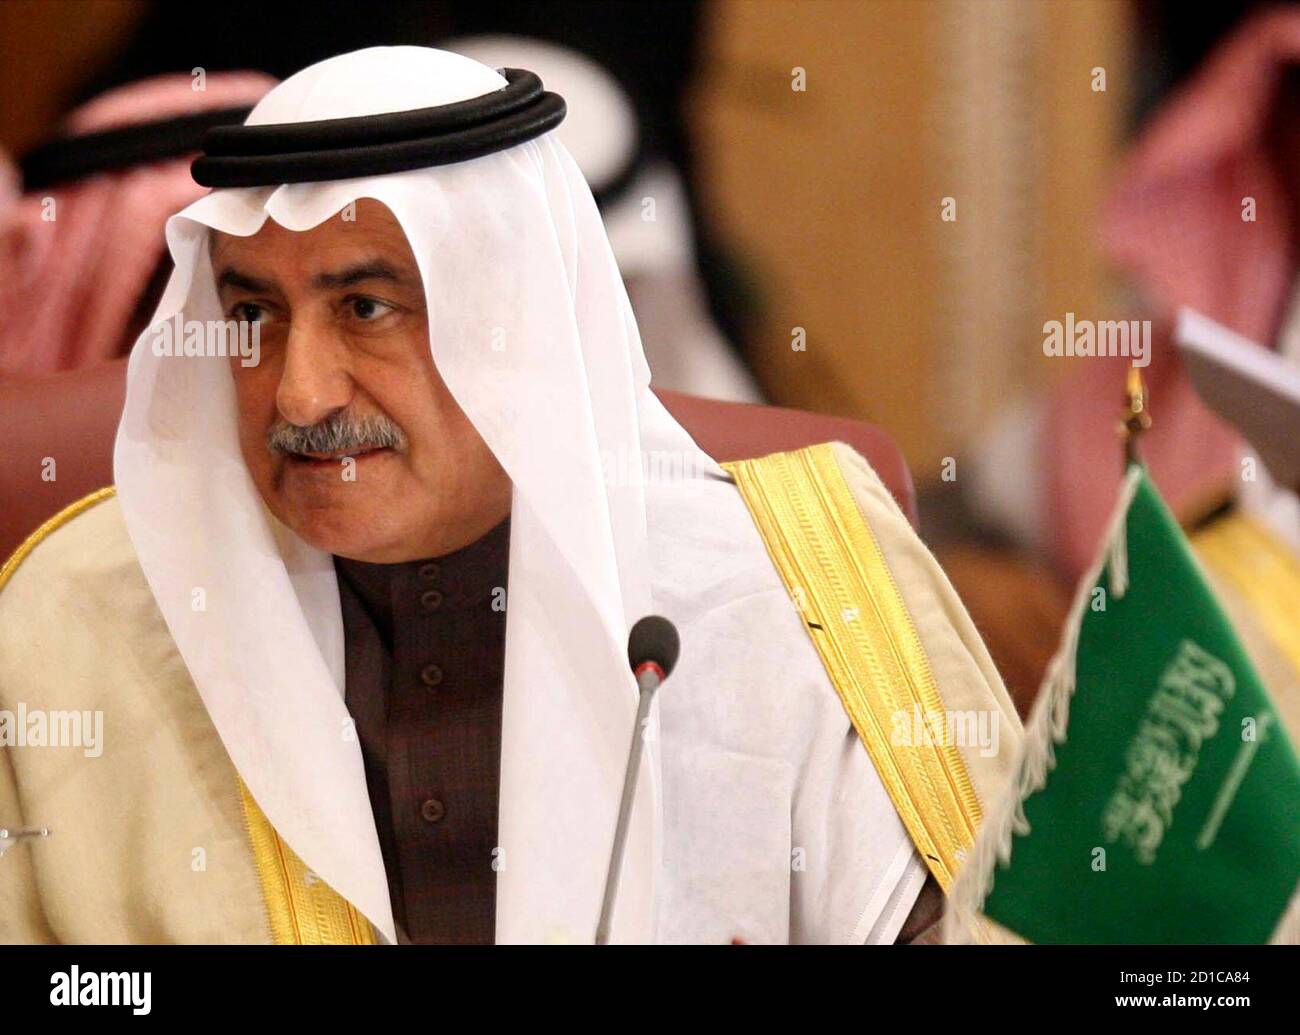 Page 8 - Bank Of Kuwait High Resolution Stock Photography and Images - Alamy